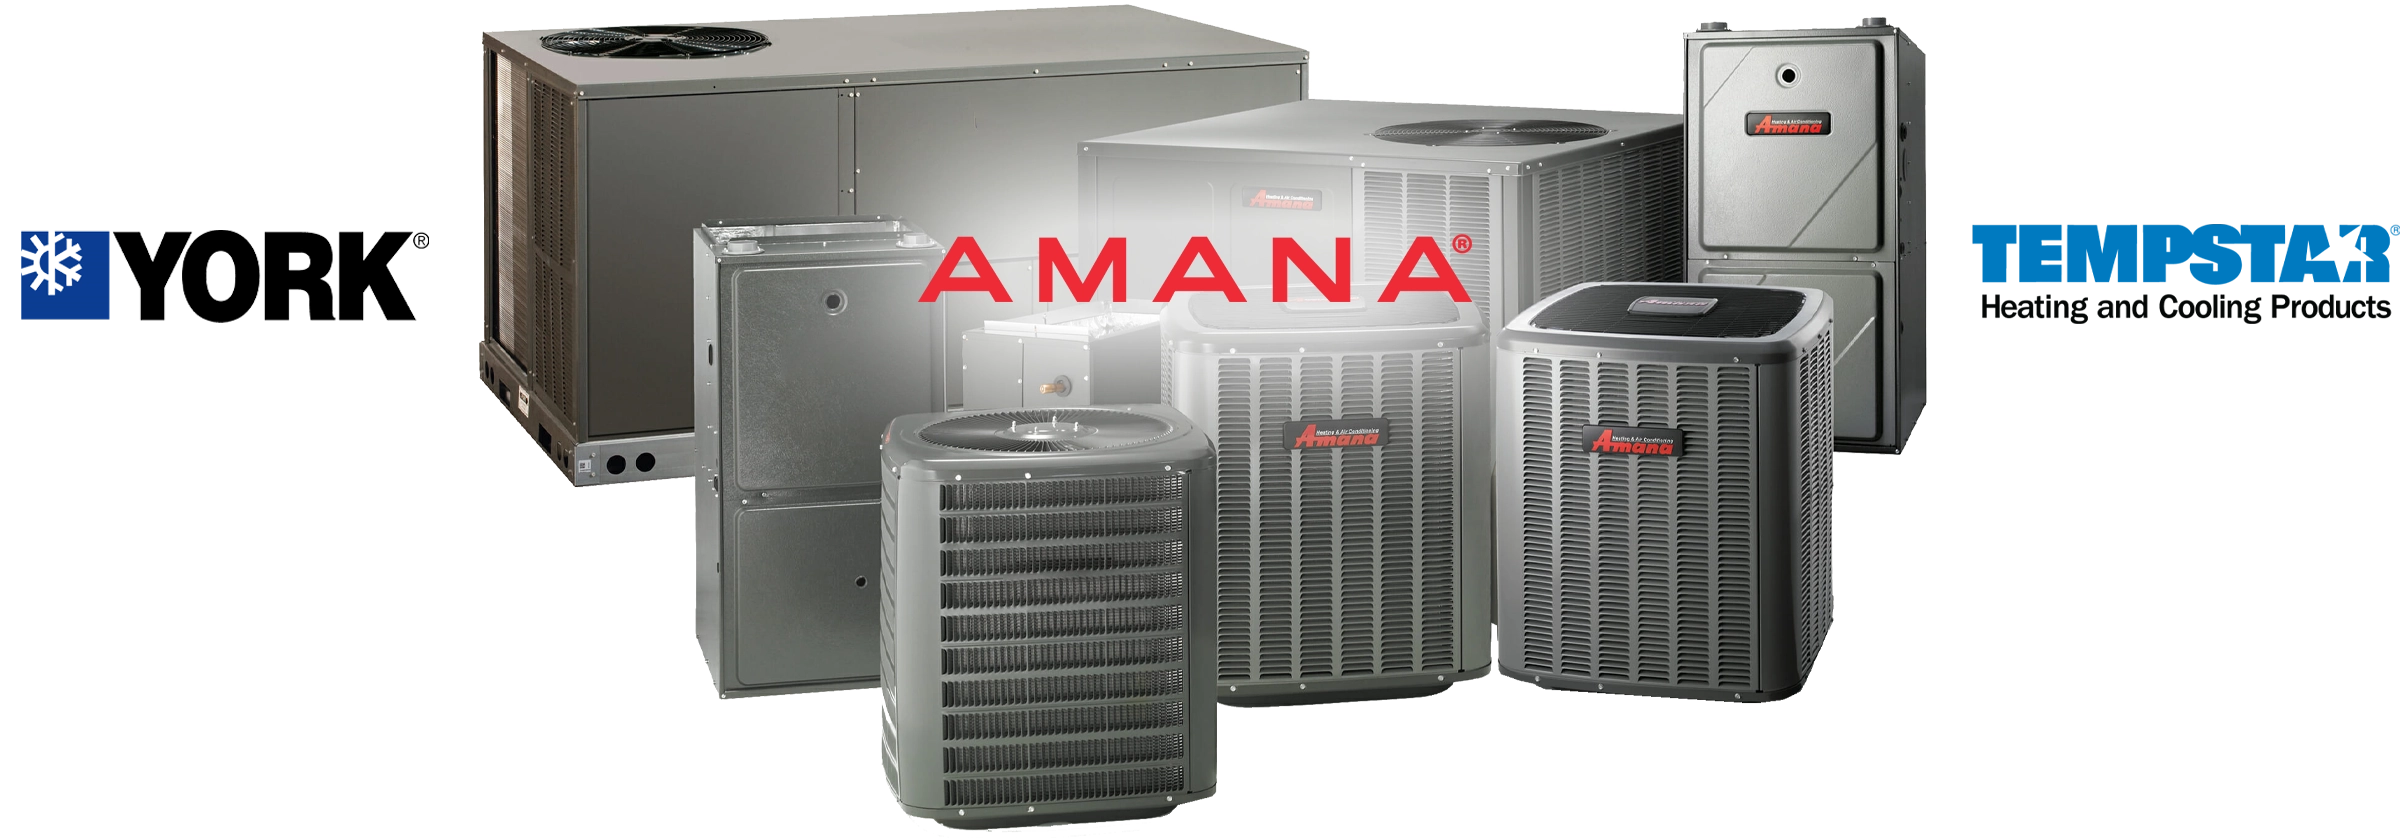 Michigan Comfort Systems Heating and Cooling works with Amana Furnace products in Wayne County MI.